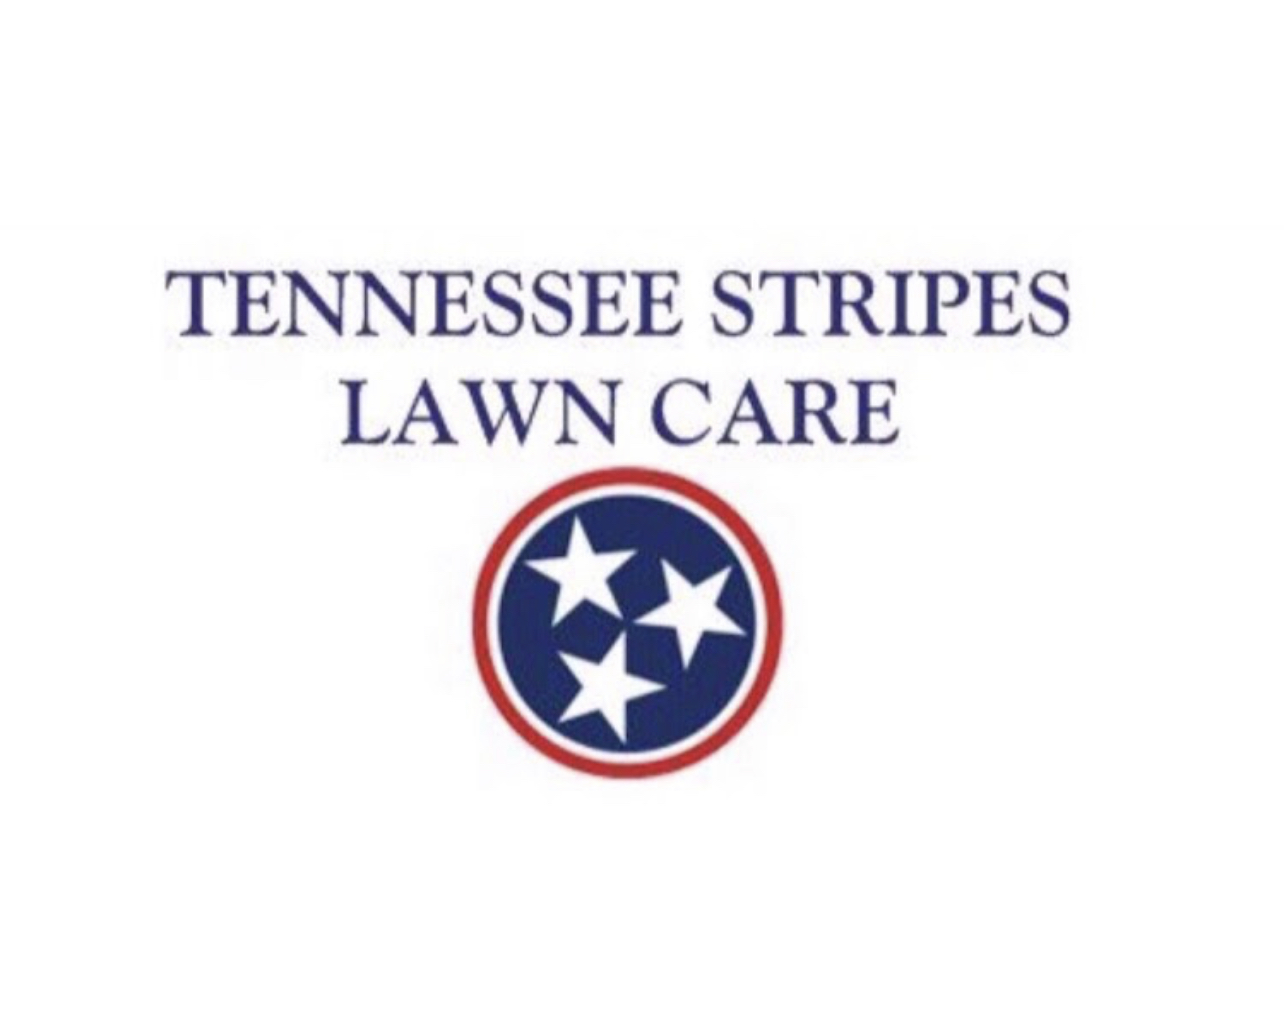 Tennessee Stripes Lawn Care 910 Co Rd 48, Calhoun Tennessee 37309